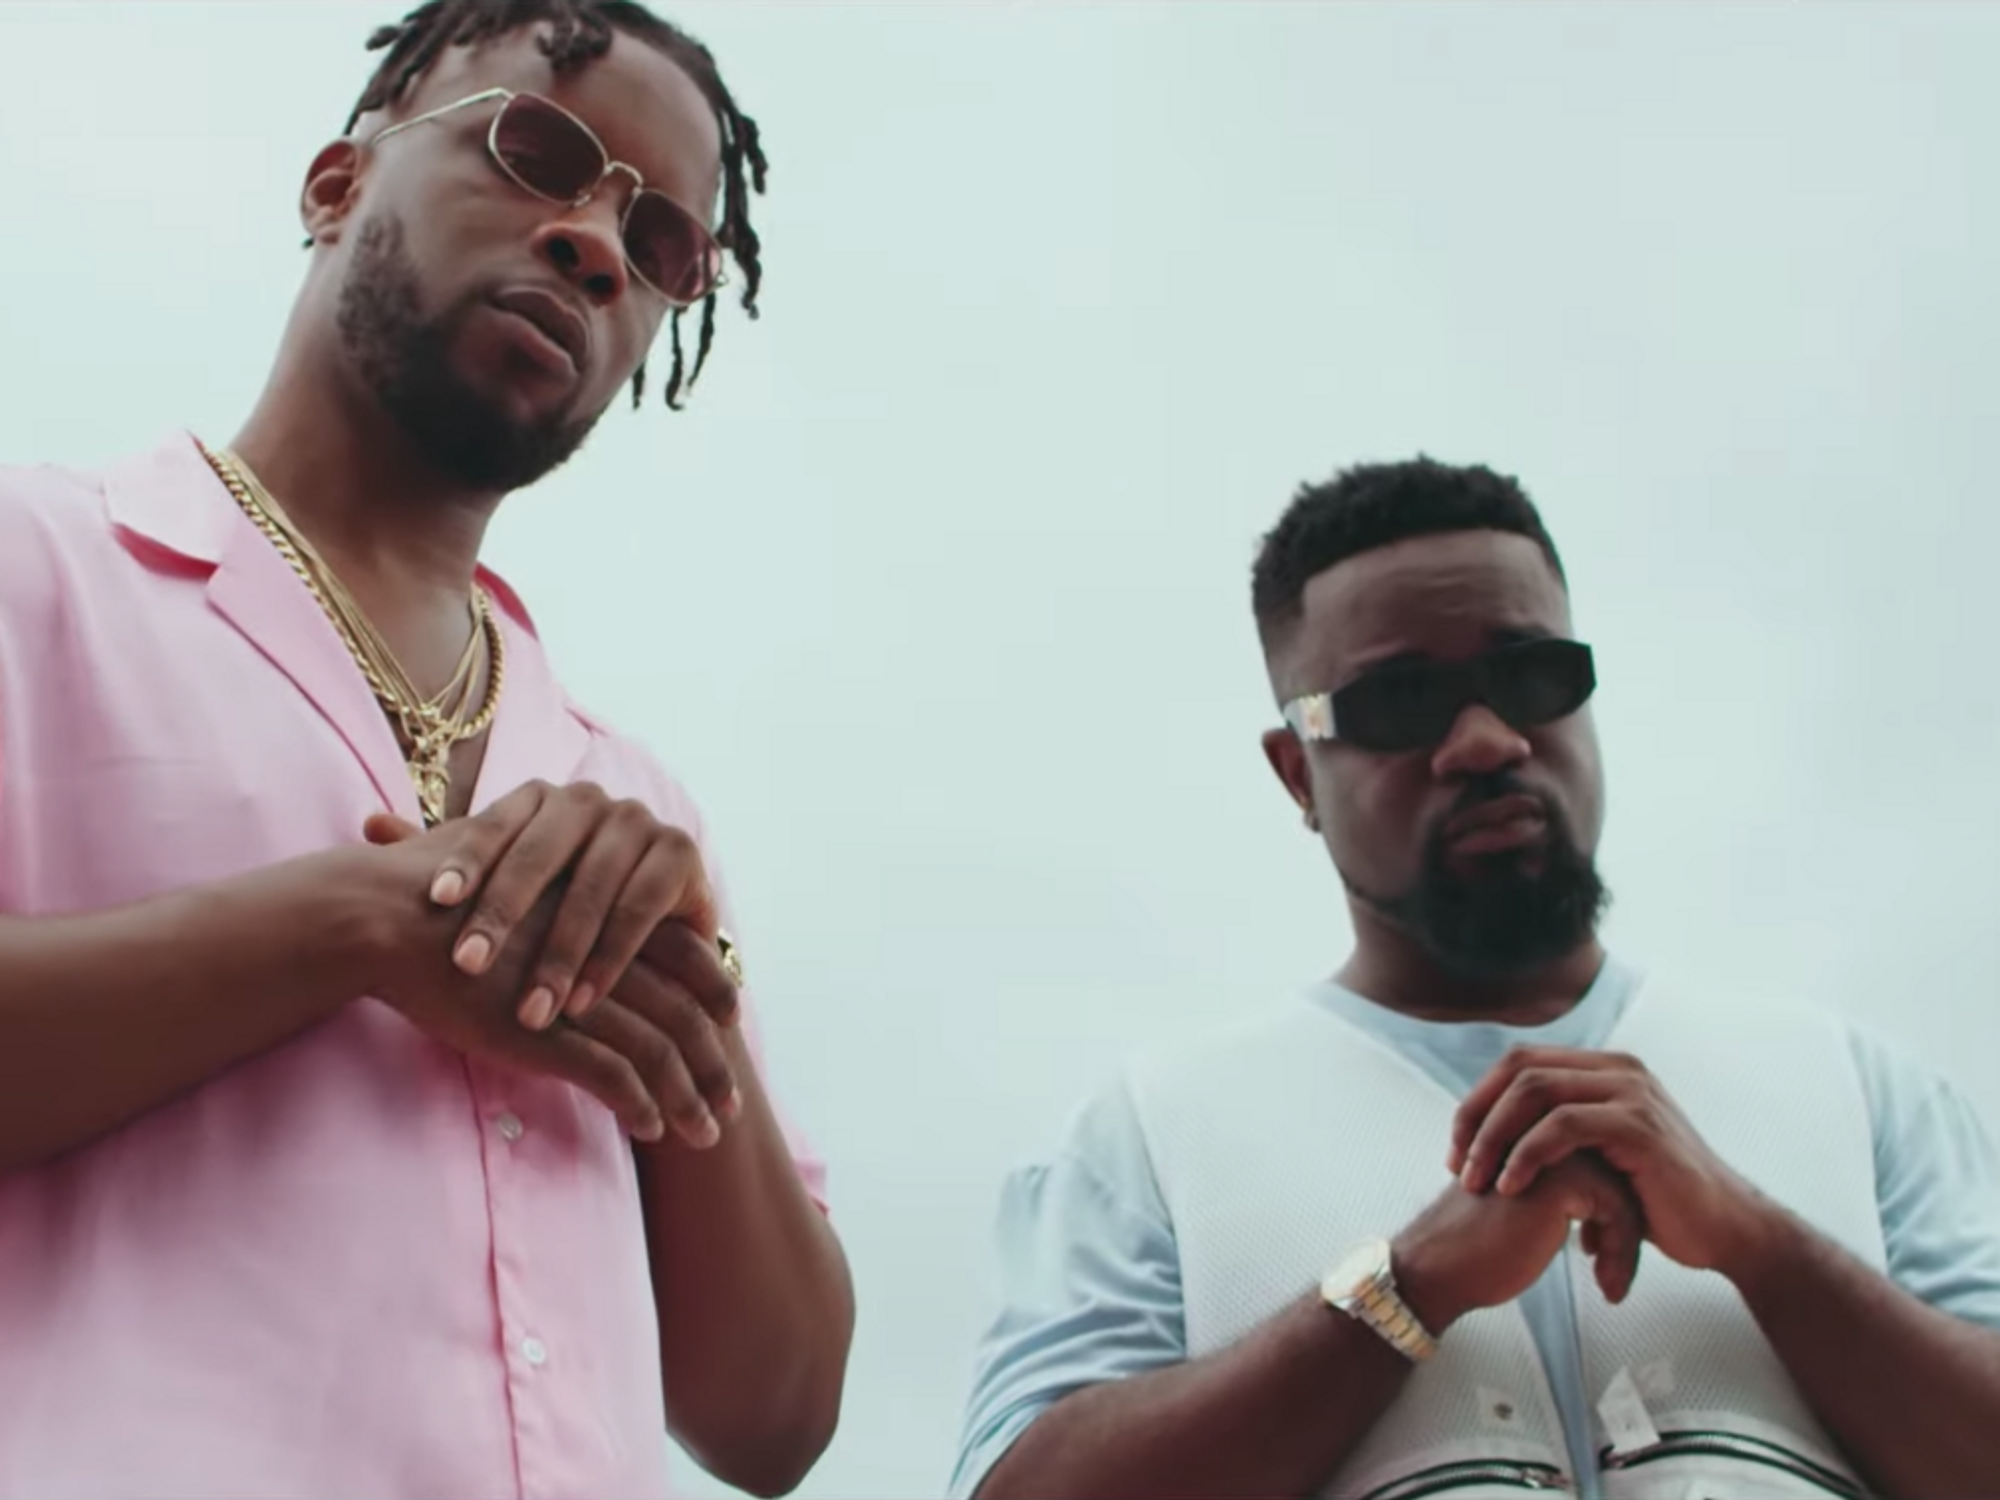 Watch Sarkodie's New Music Video for 'Feelings' Featuring Maleek Berry